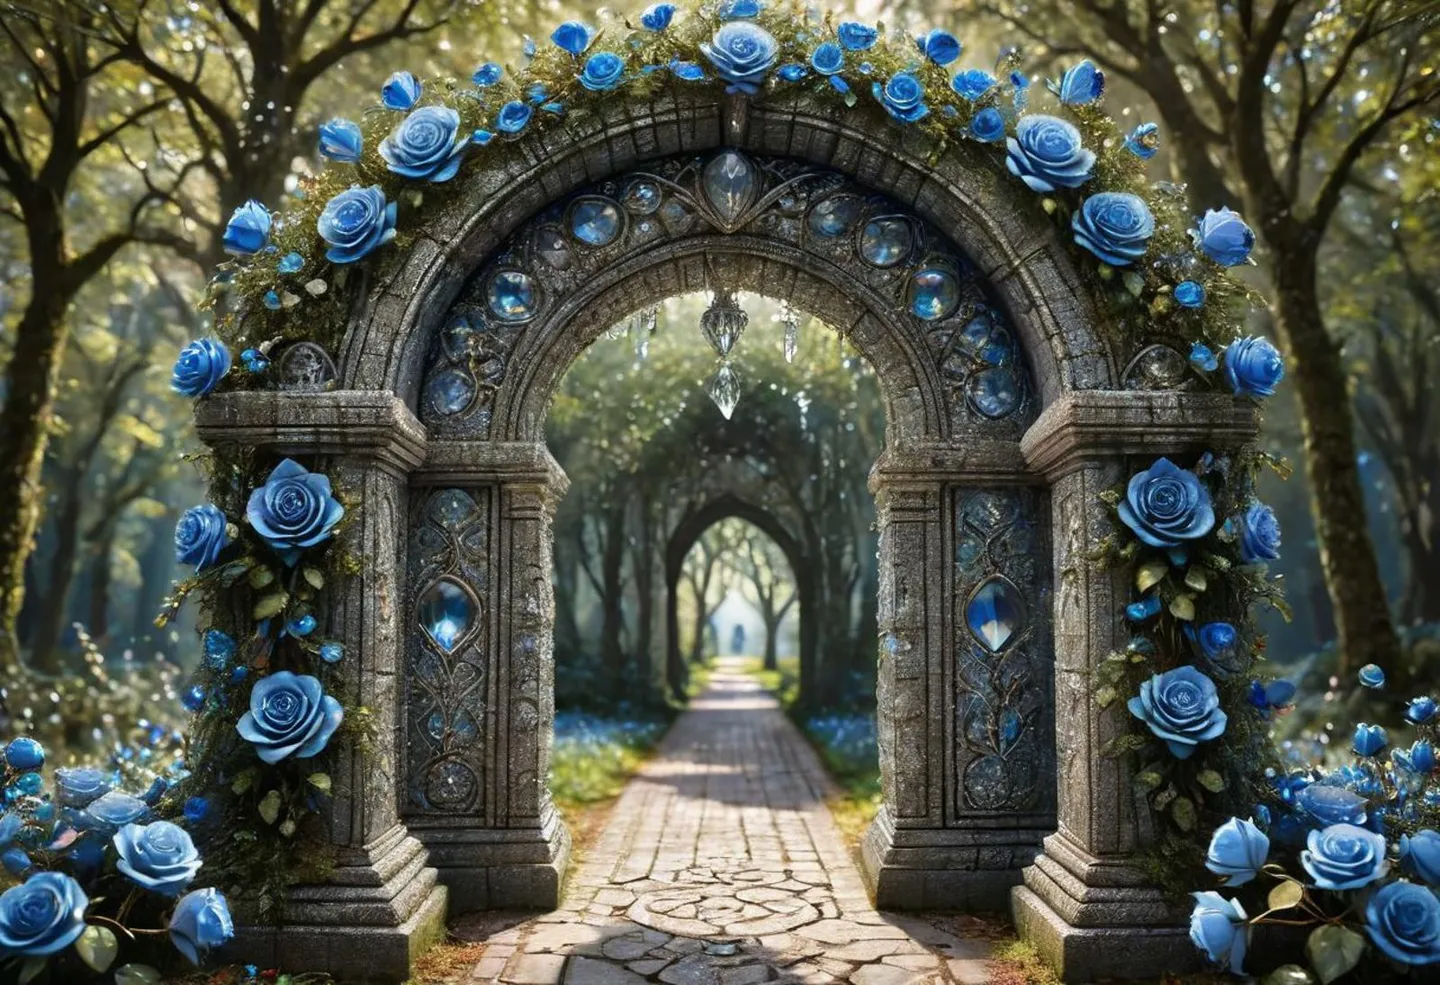 An AI generated image using Stable Diffusion of an ornate stone archway adorned with vivid blue roses in a lush, green forest.